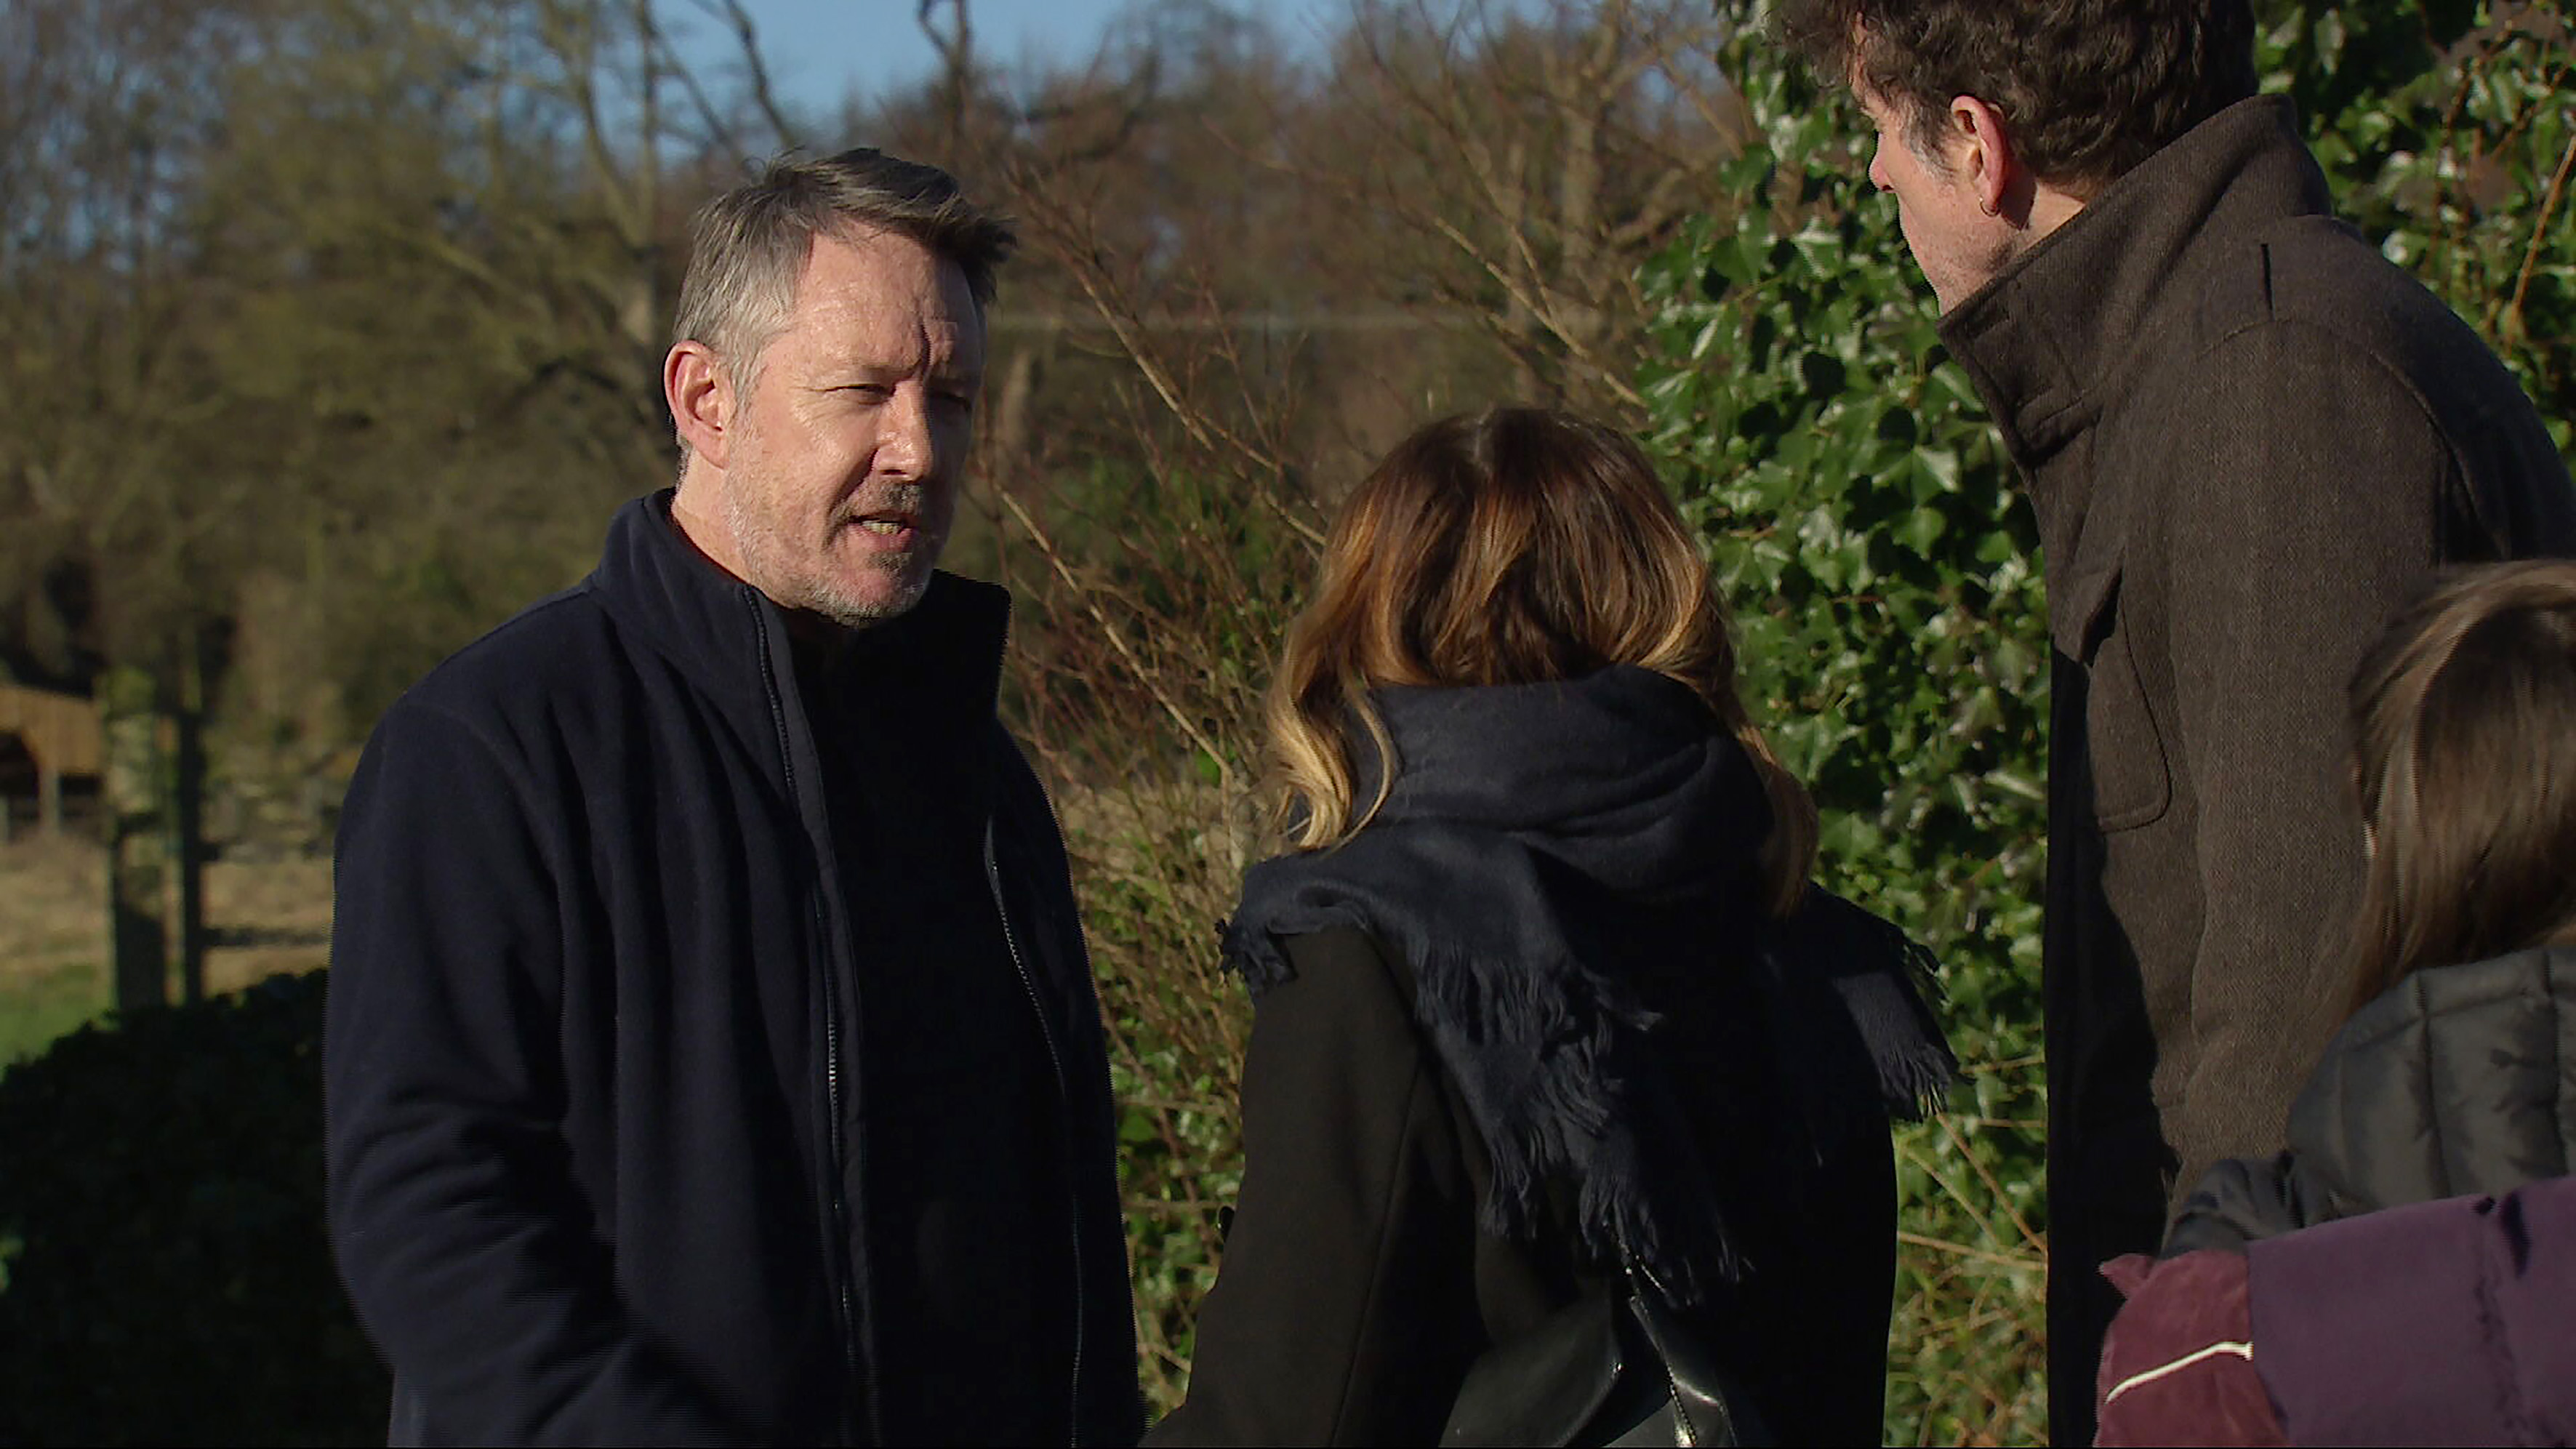 But in another twist, Gus makes Rhona an offer